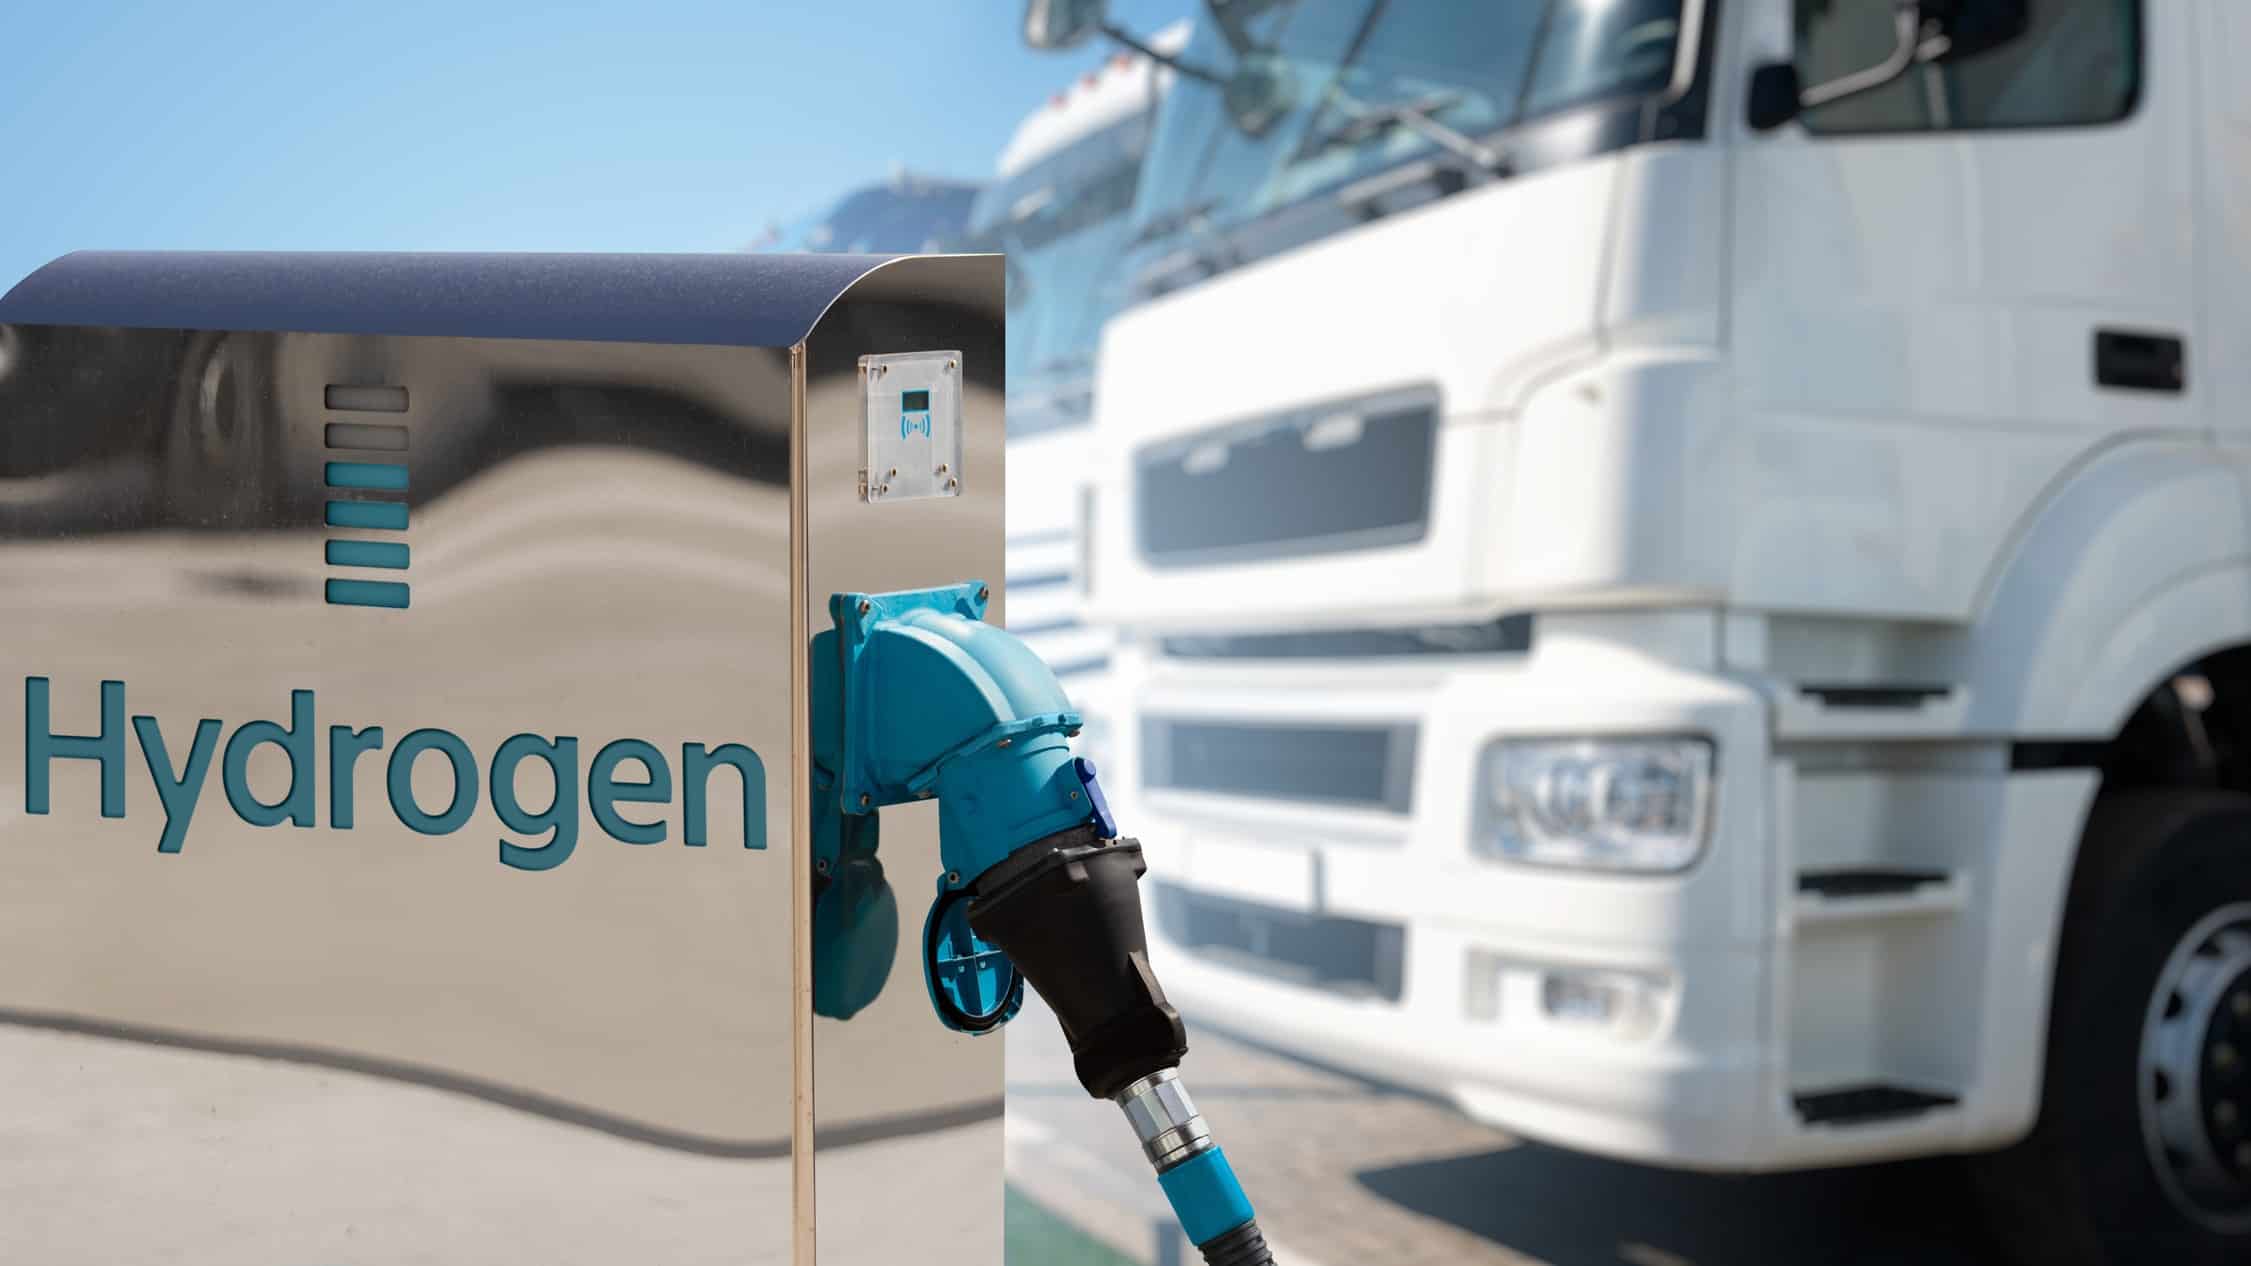 Hydrogen filling station with a background of trucks.